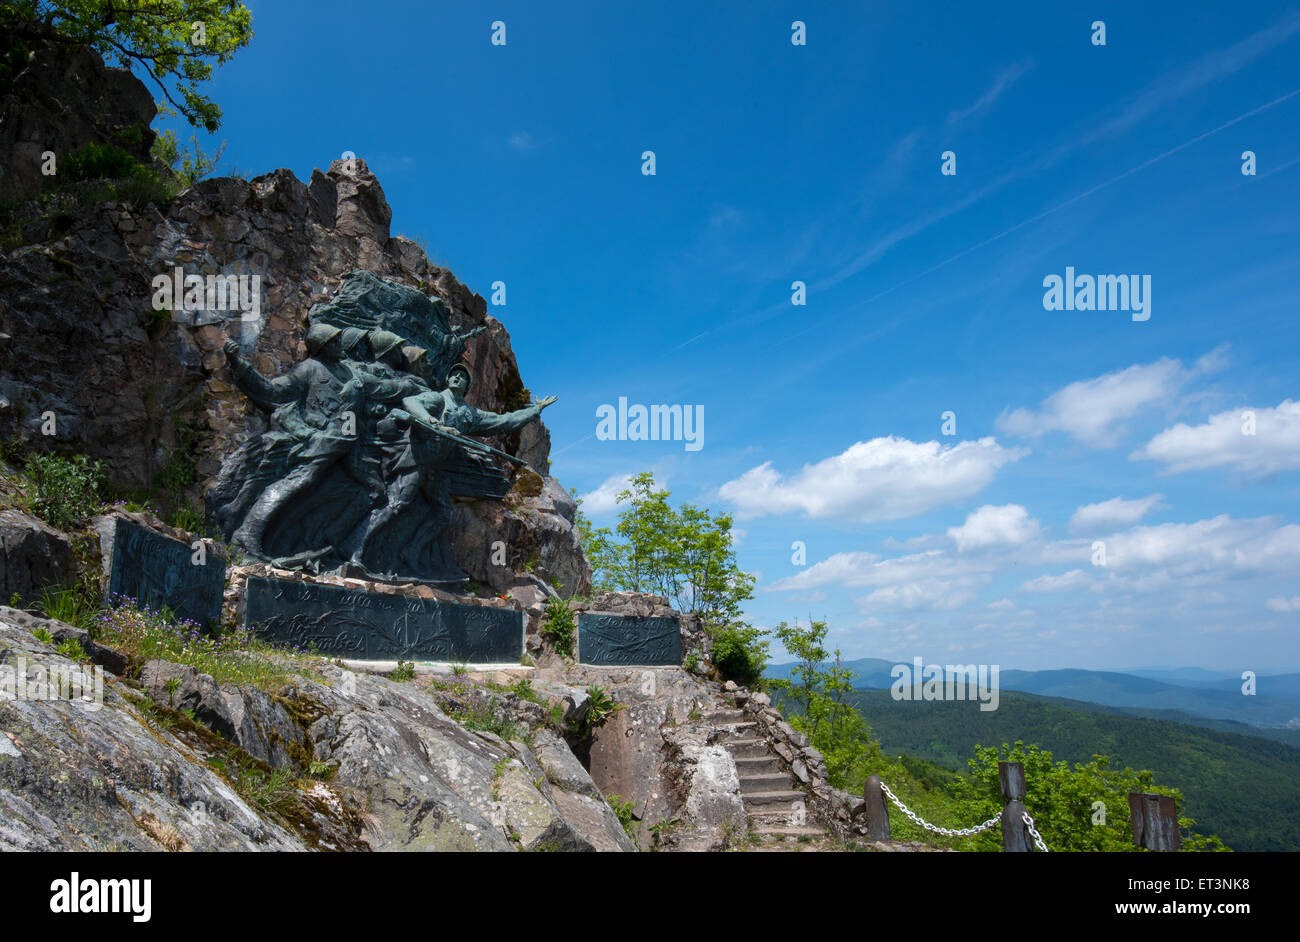 Monument of the 152nd French Infantry Regiment on Hartmannswillerkopf hill, Alsace, France Stock Photo